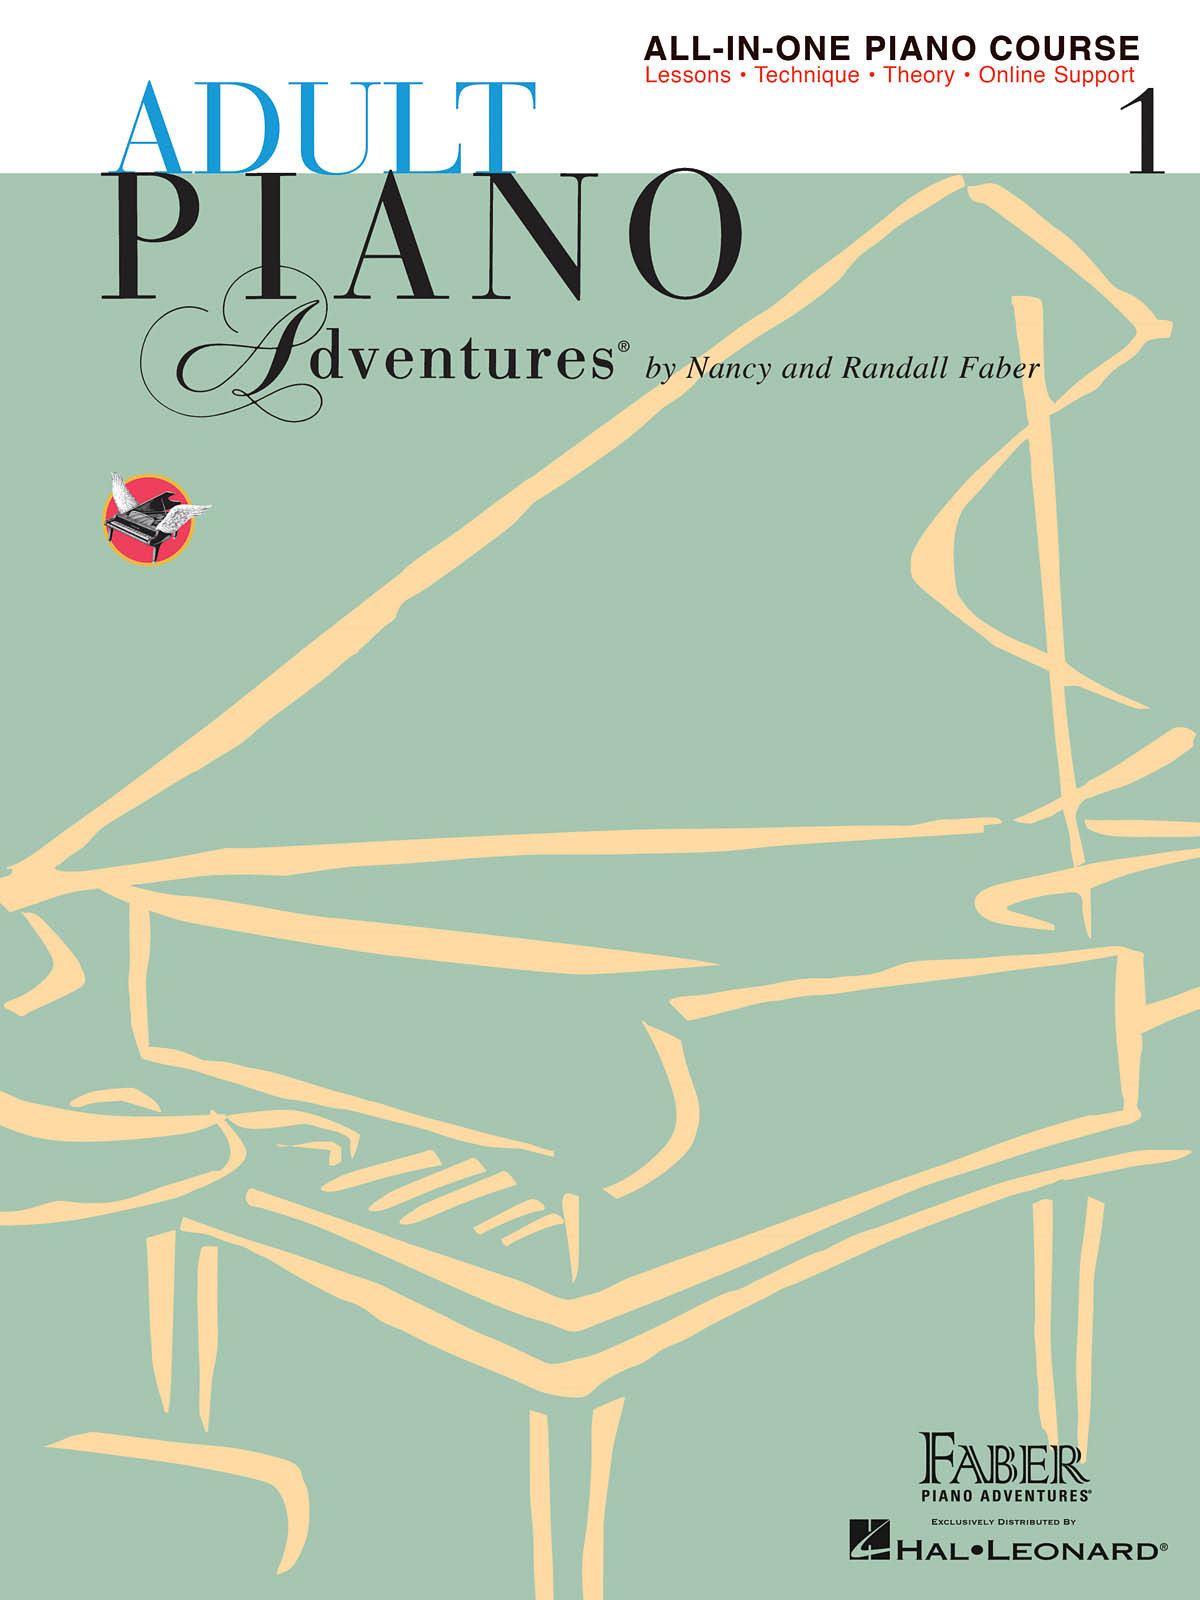 Adult Piano Adventures All-in-One Lesson Book 1 - Spiral Bound